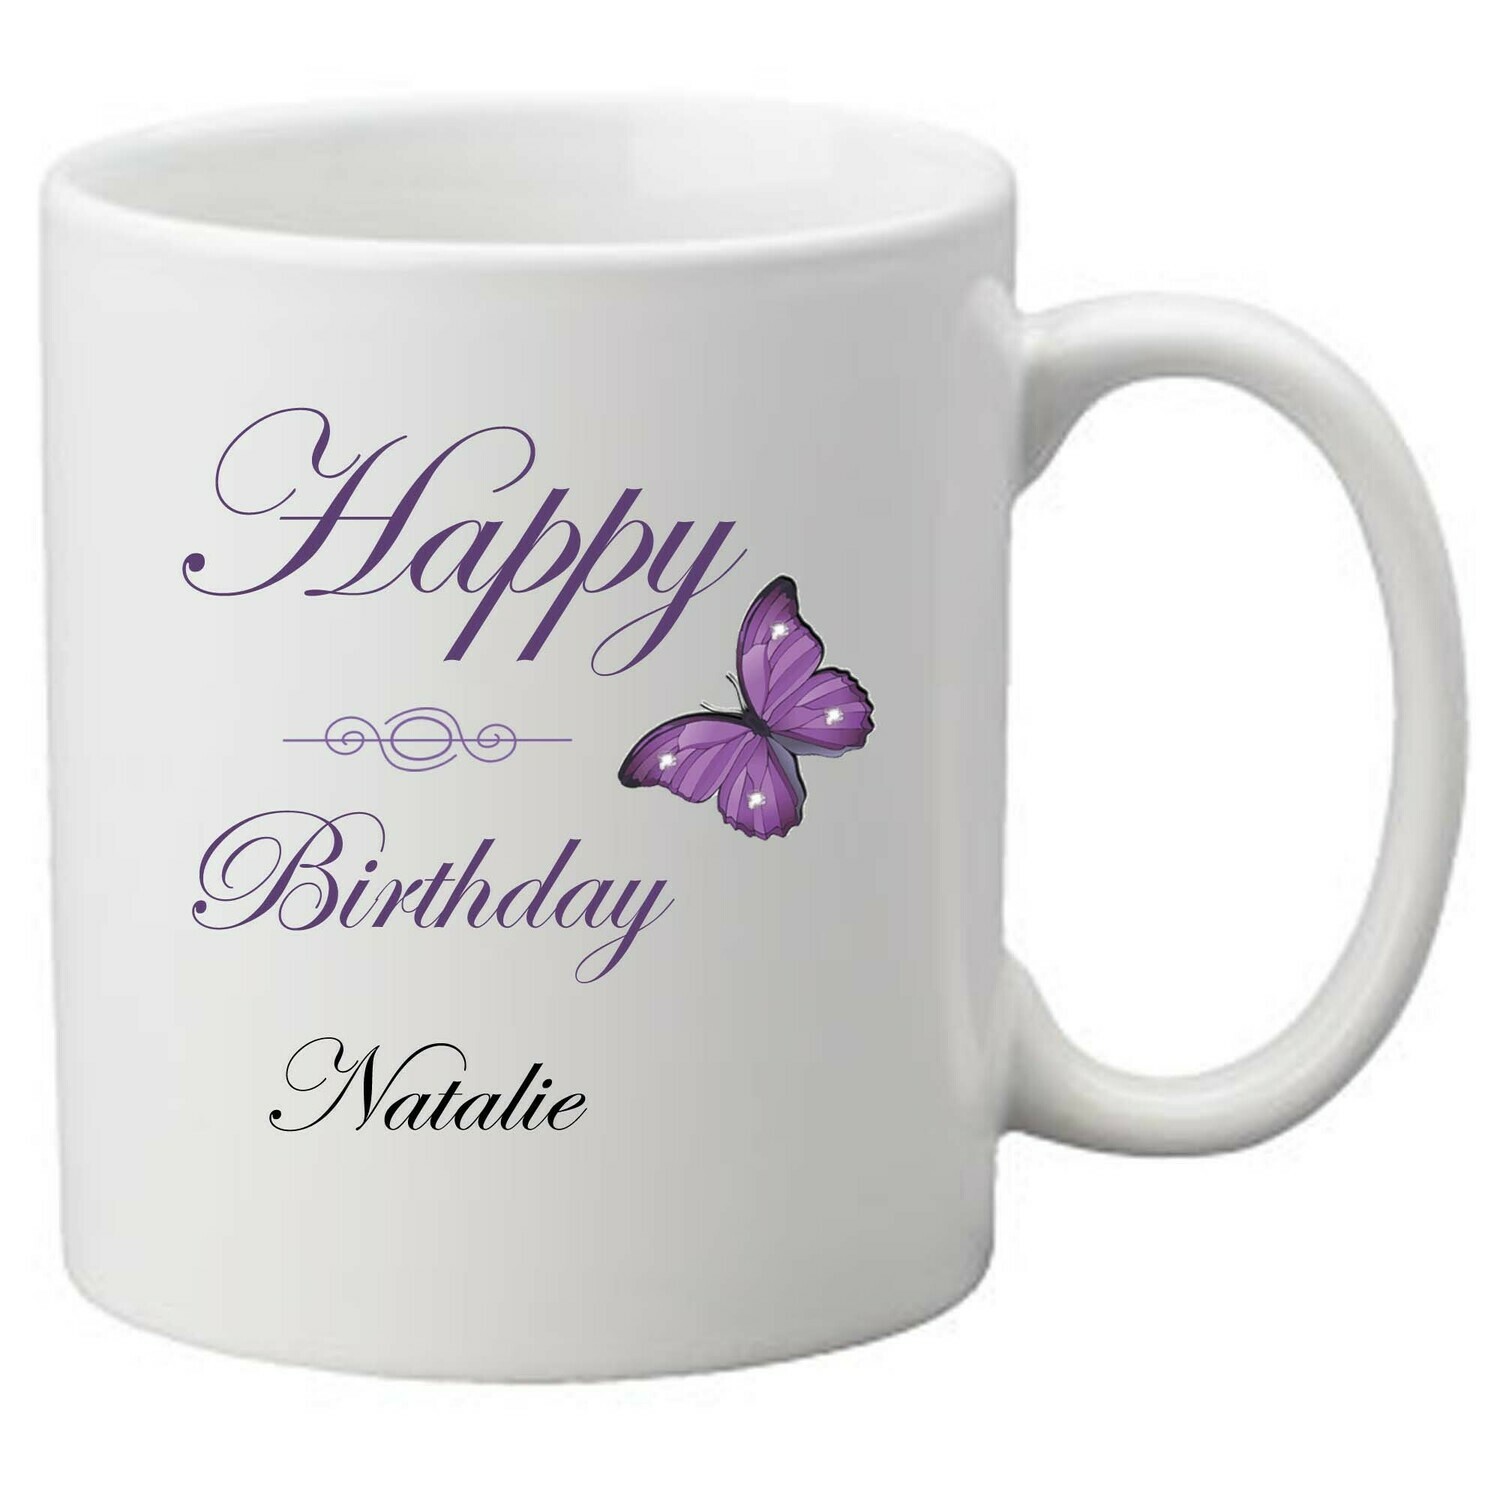 Personalized Coffee Mug Happy Birthday Highlighted Butterfly Name